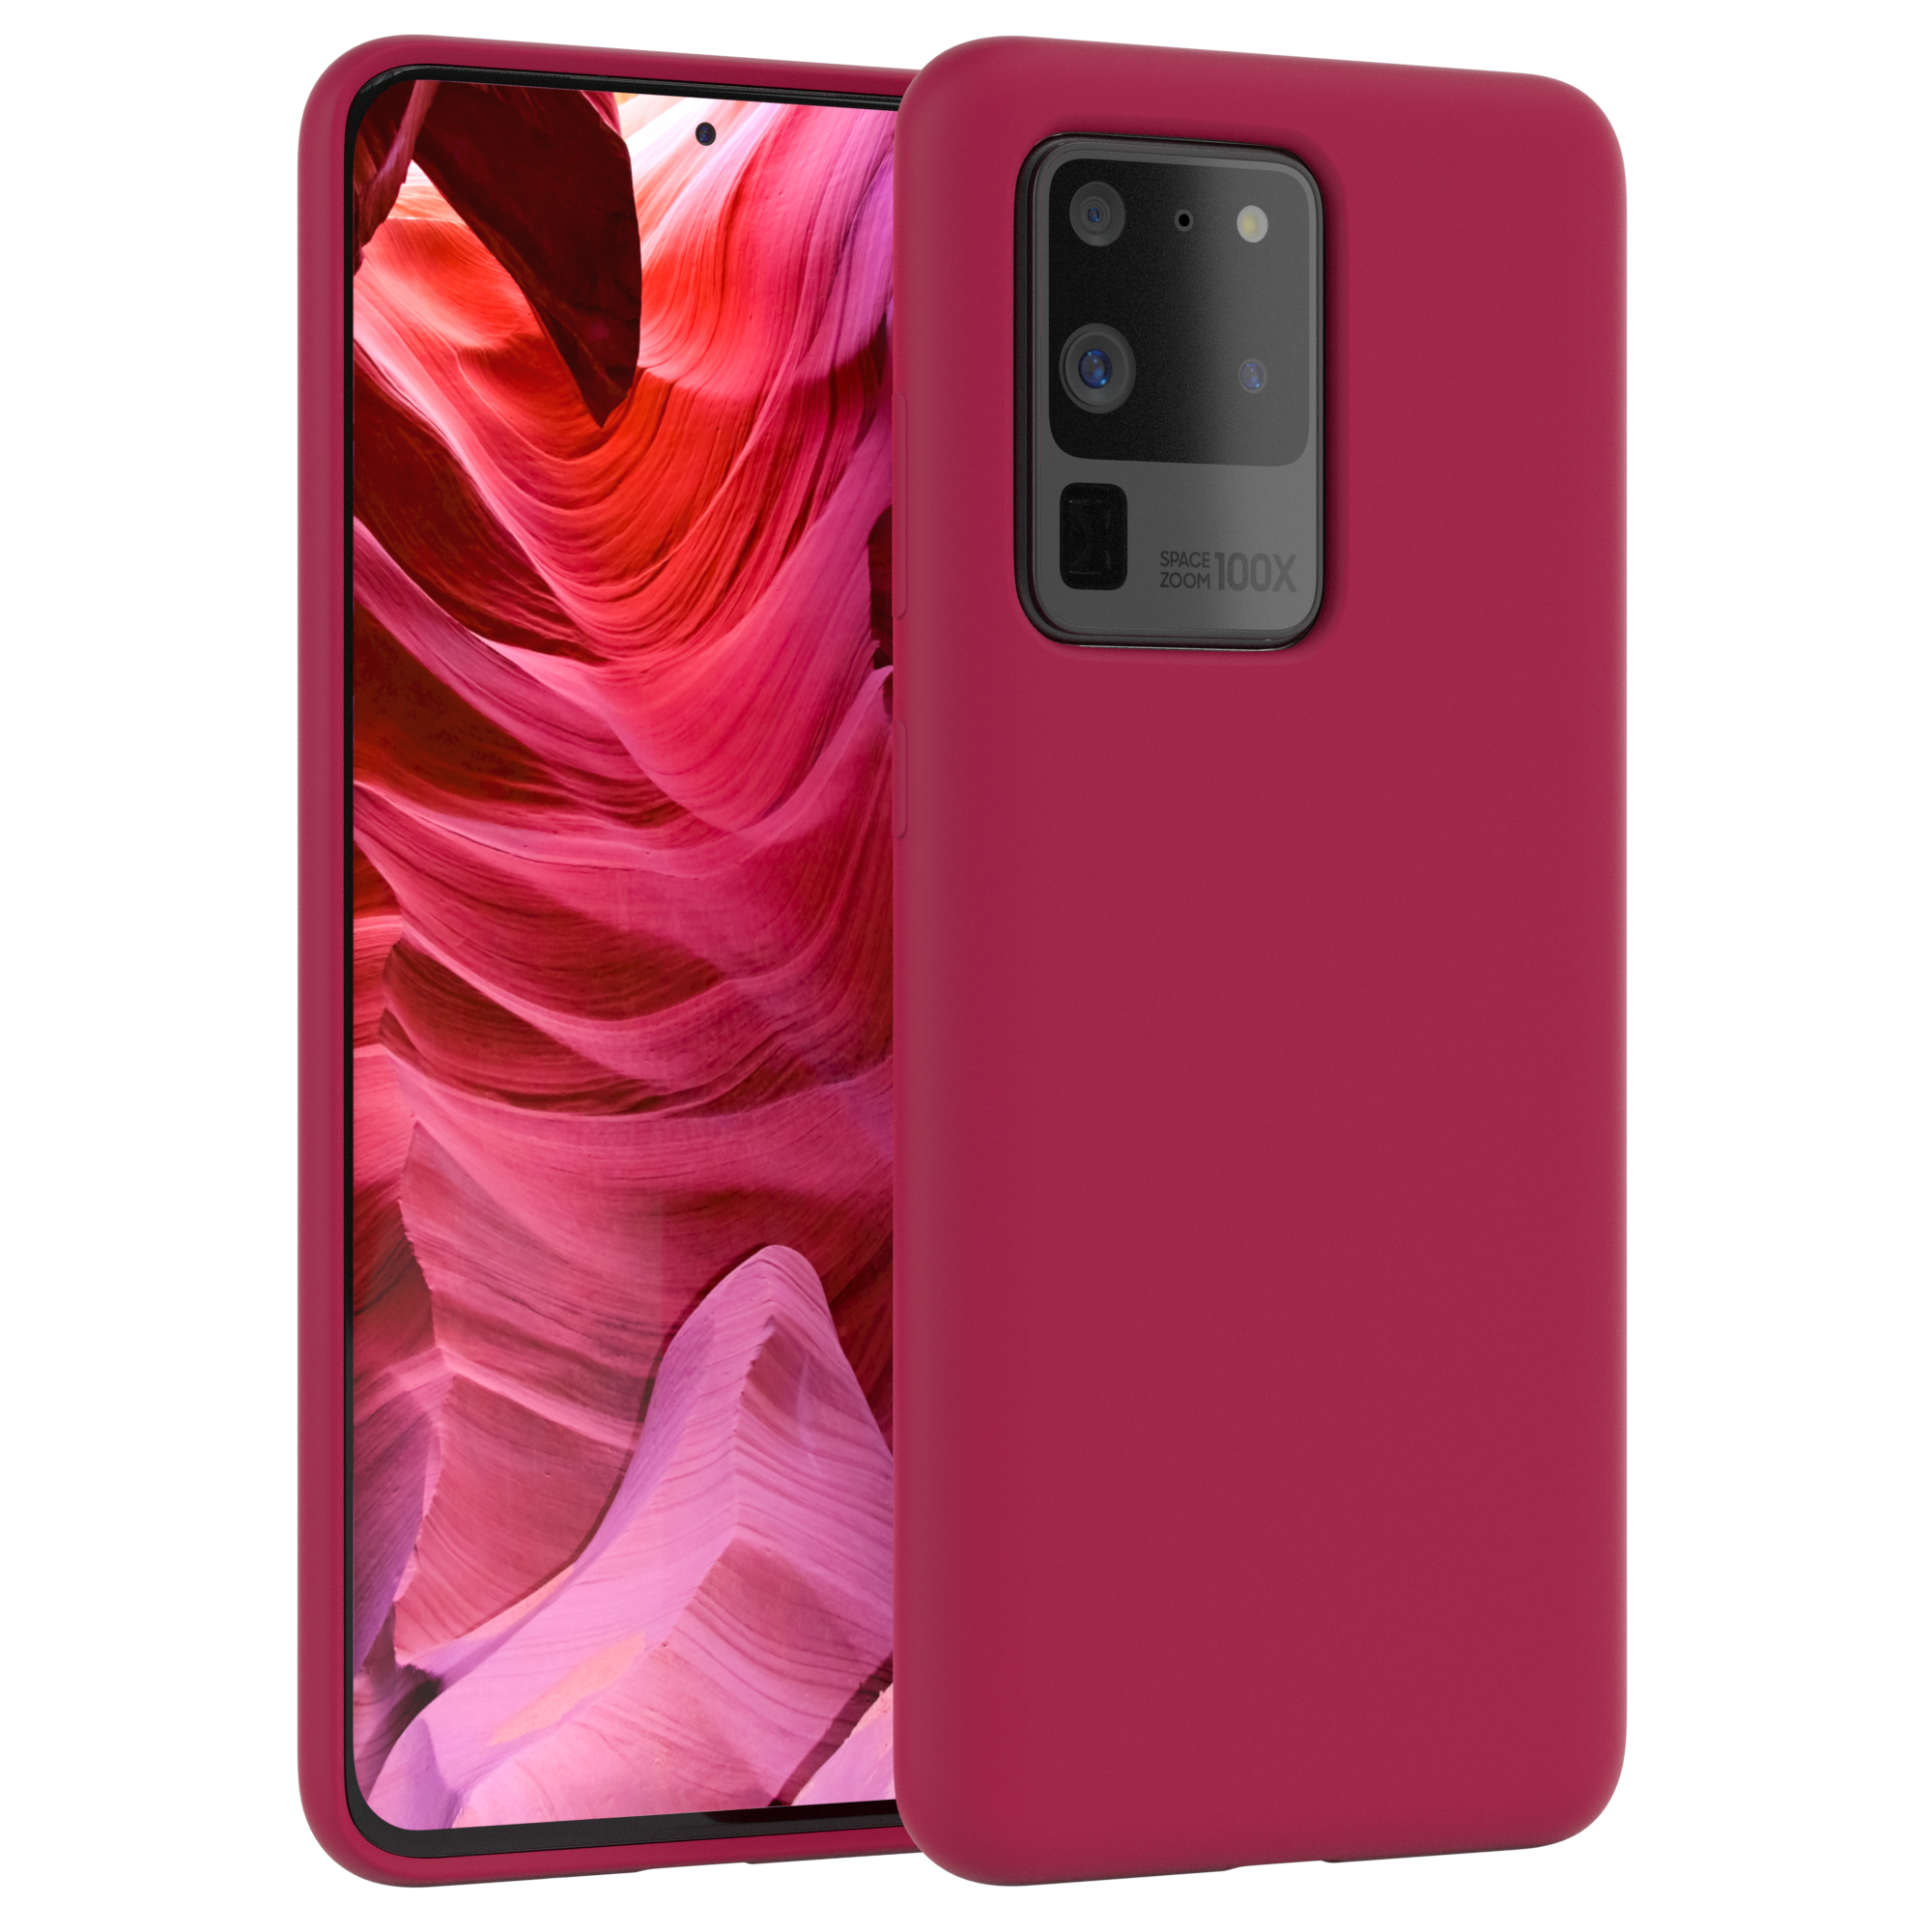 EAZY CASE Premium / Silikon S20 Ultra Rot Samsung, Backcover, Handycase, / Beere 5G, Ultra Galaxy S20